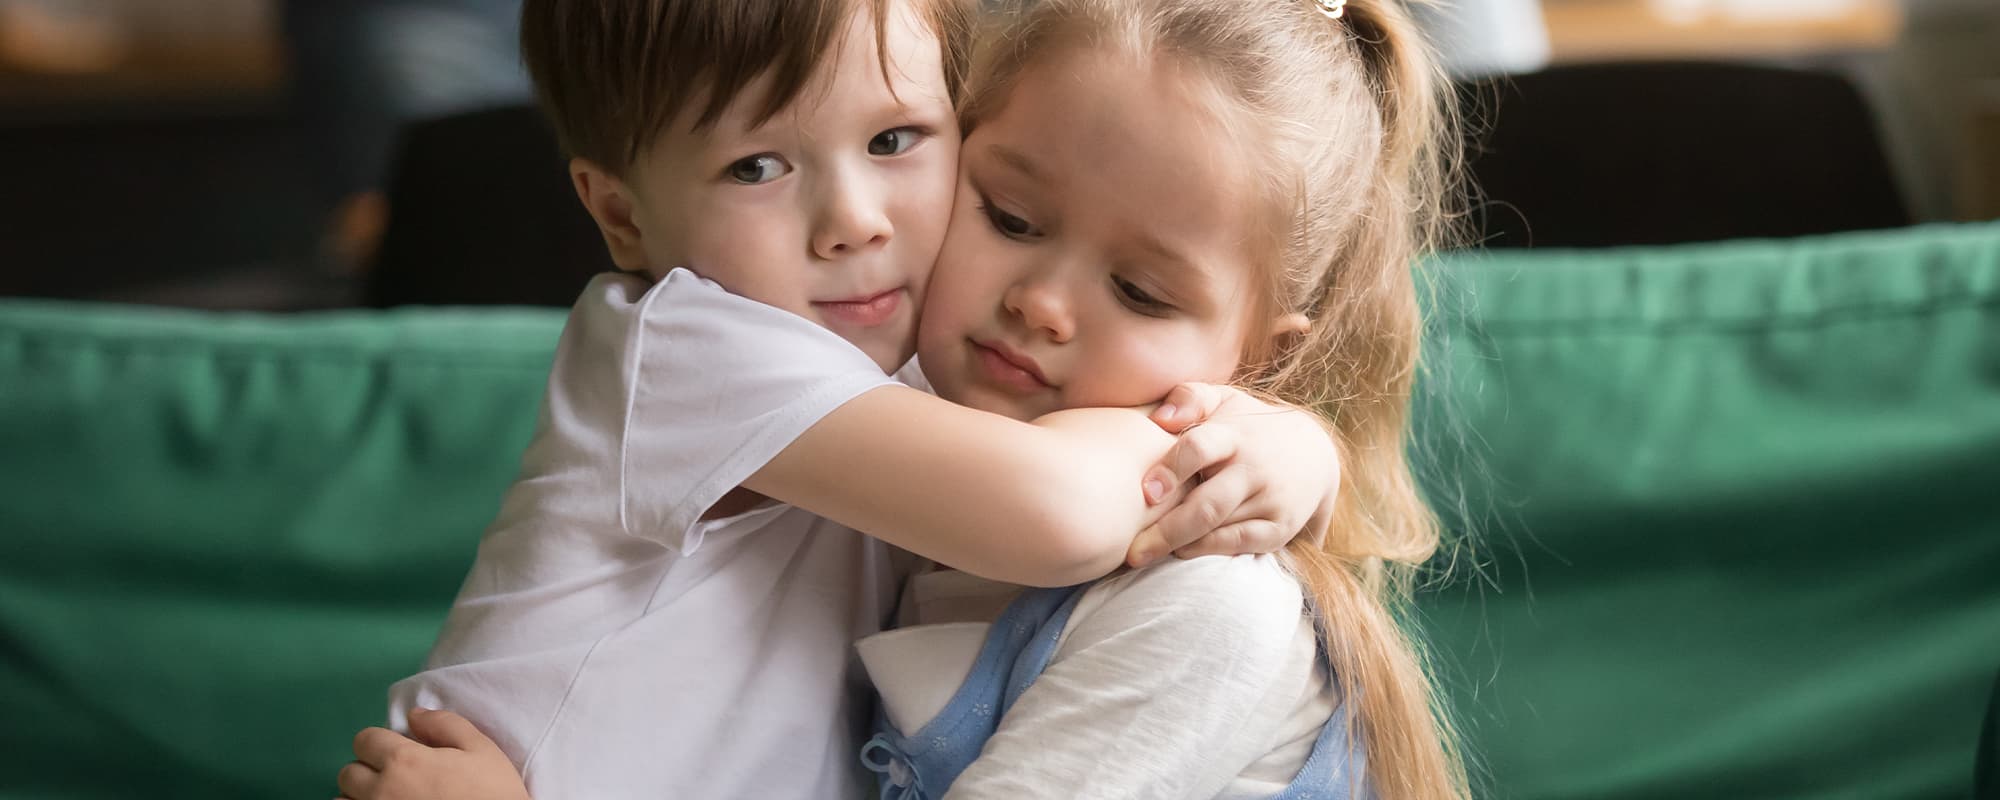 Helping Your Child Give Heartfelt Apologies – The Healing Power of Saying Sorry